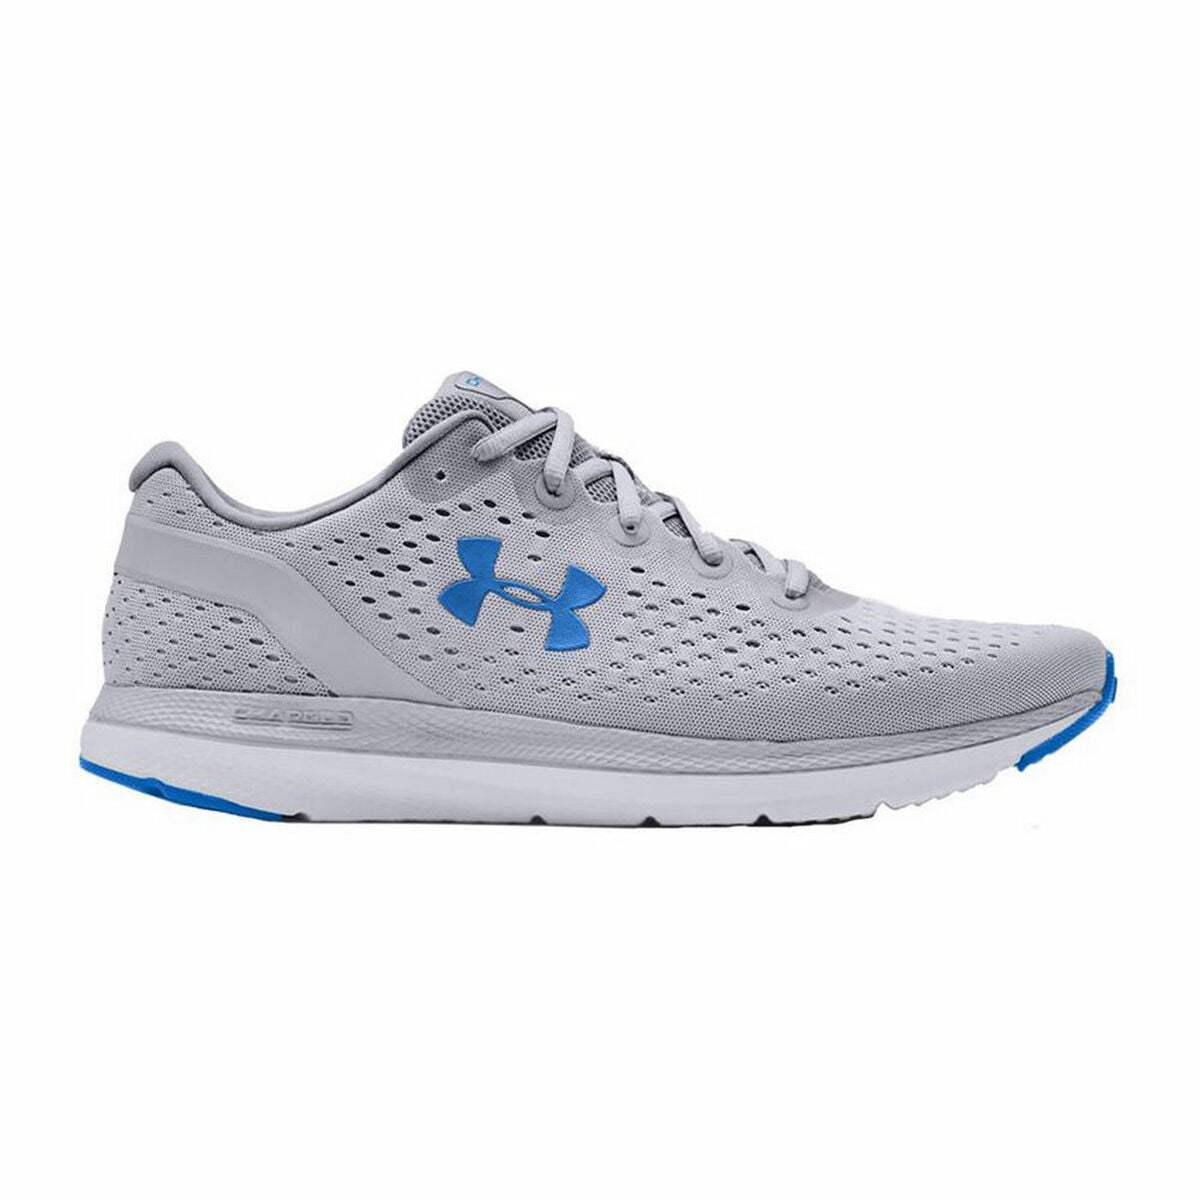 Chaussures de Running pour Adultes Under Armour Charged Impulse Gris